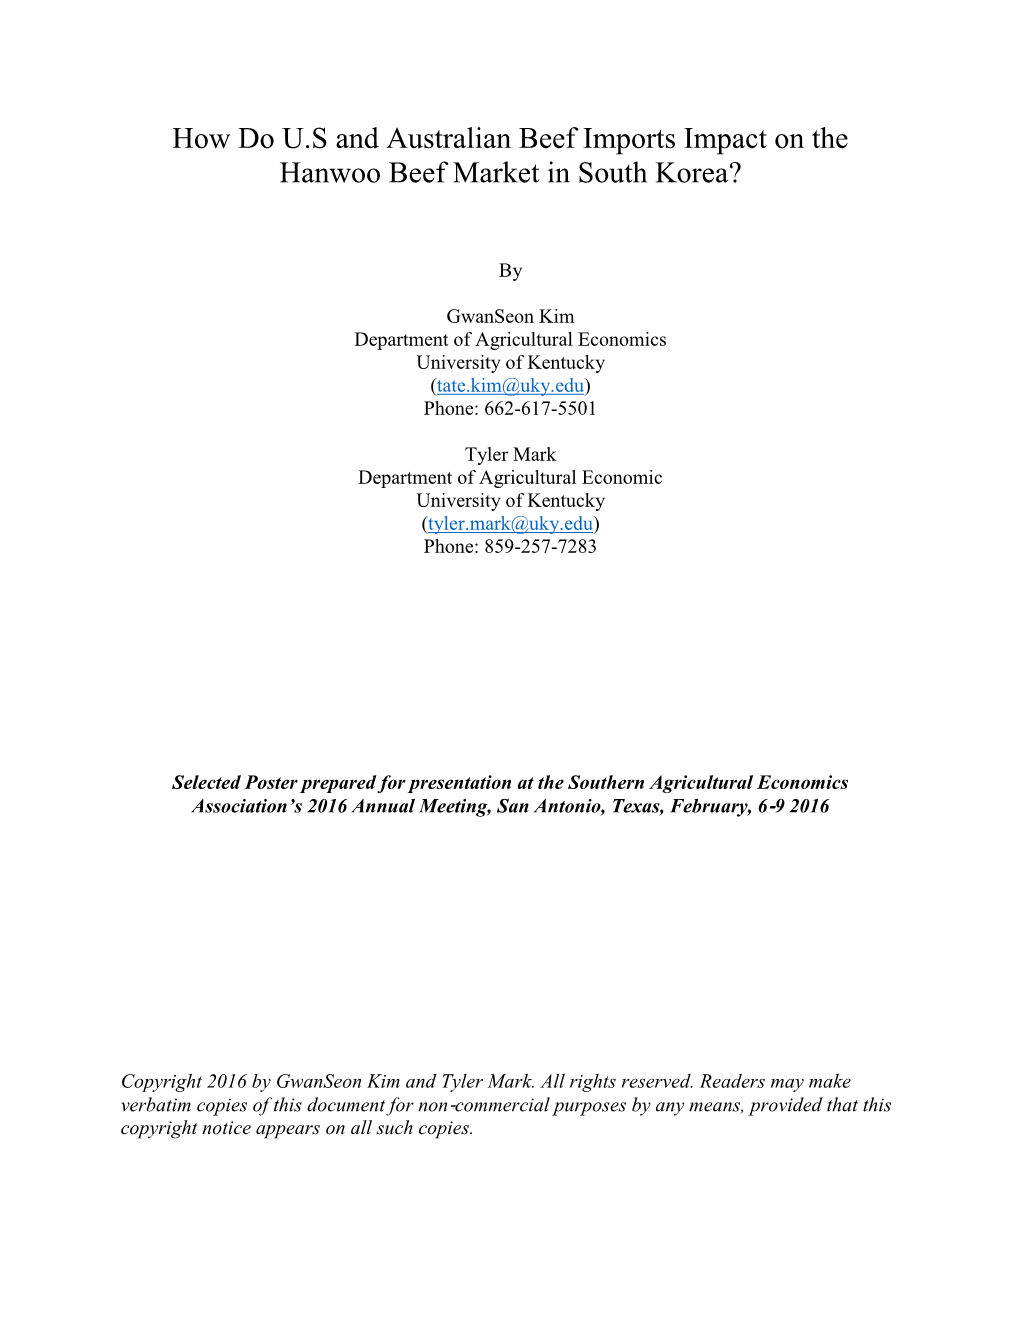 How Do U.S and Australian Beef Imports Impact on the Hanwoo Beef Market in South Korea?